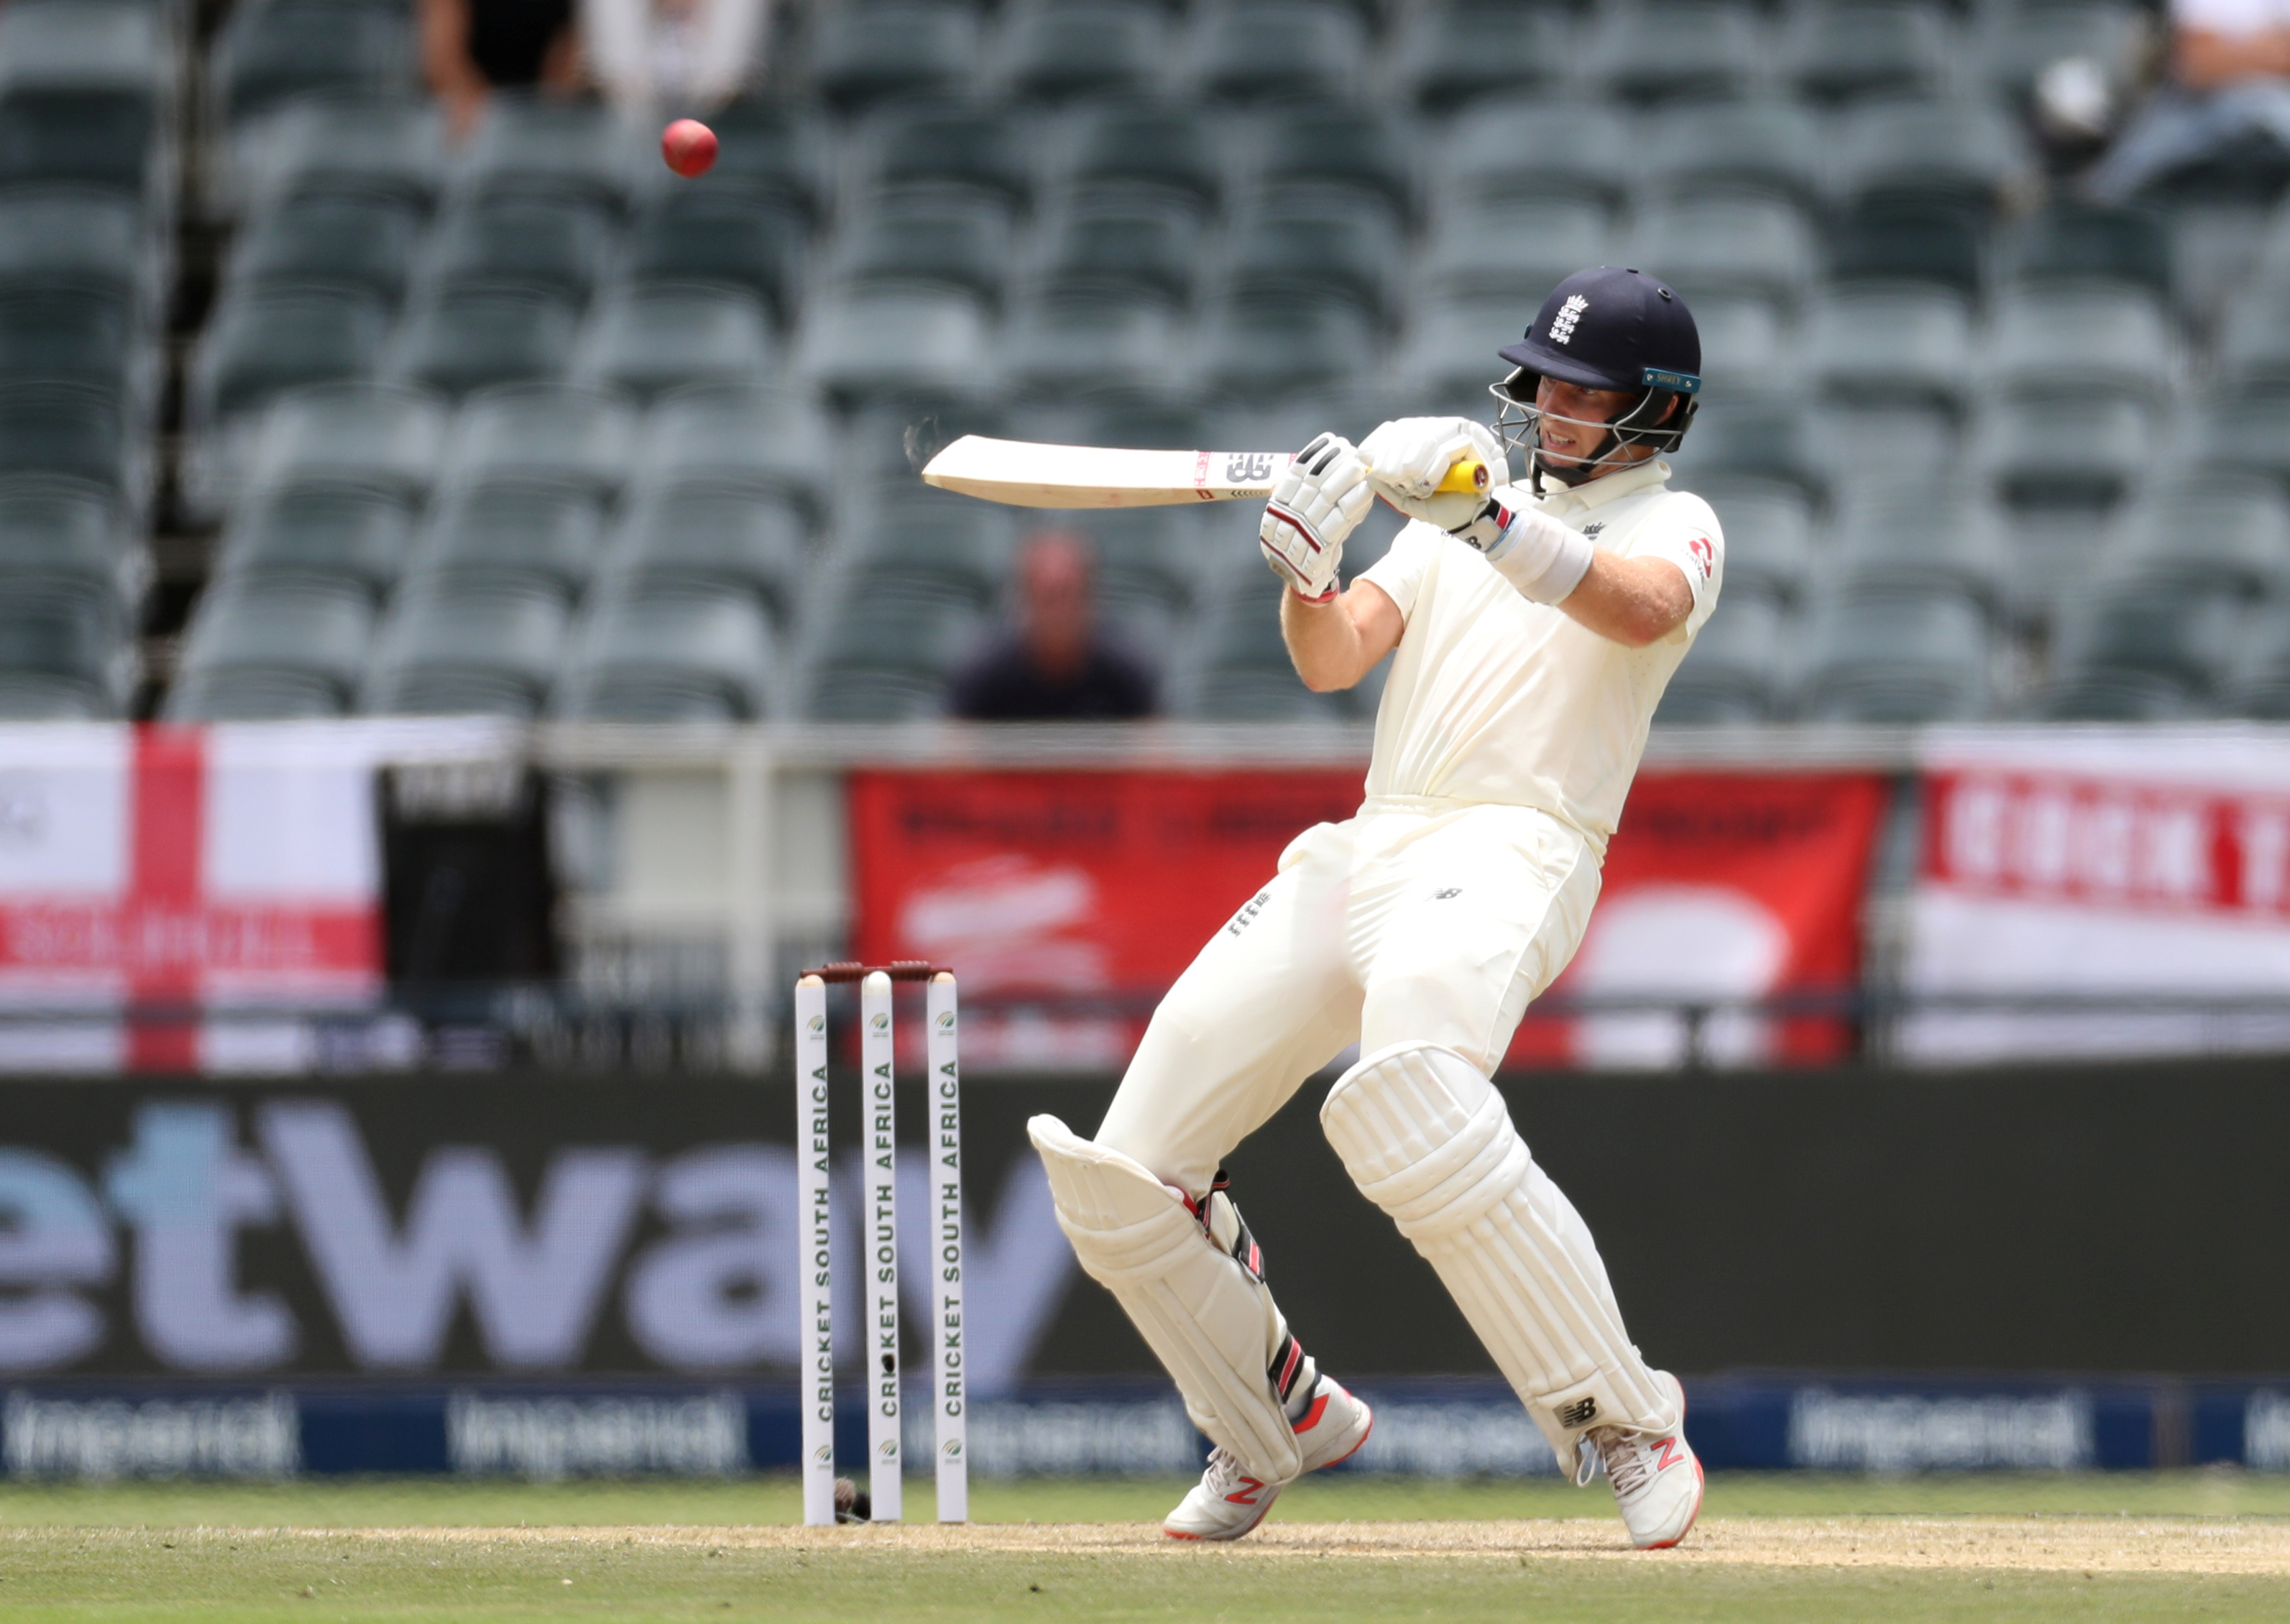 Root and Pope steer England past 300 in first innings